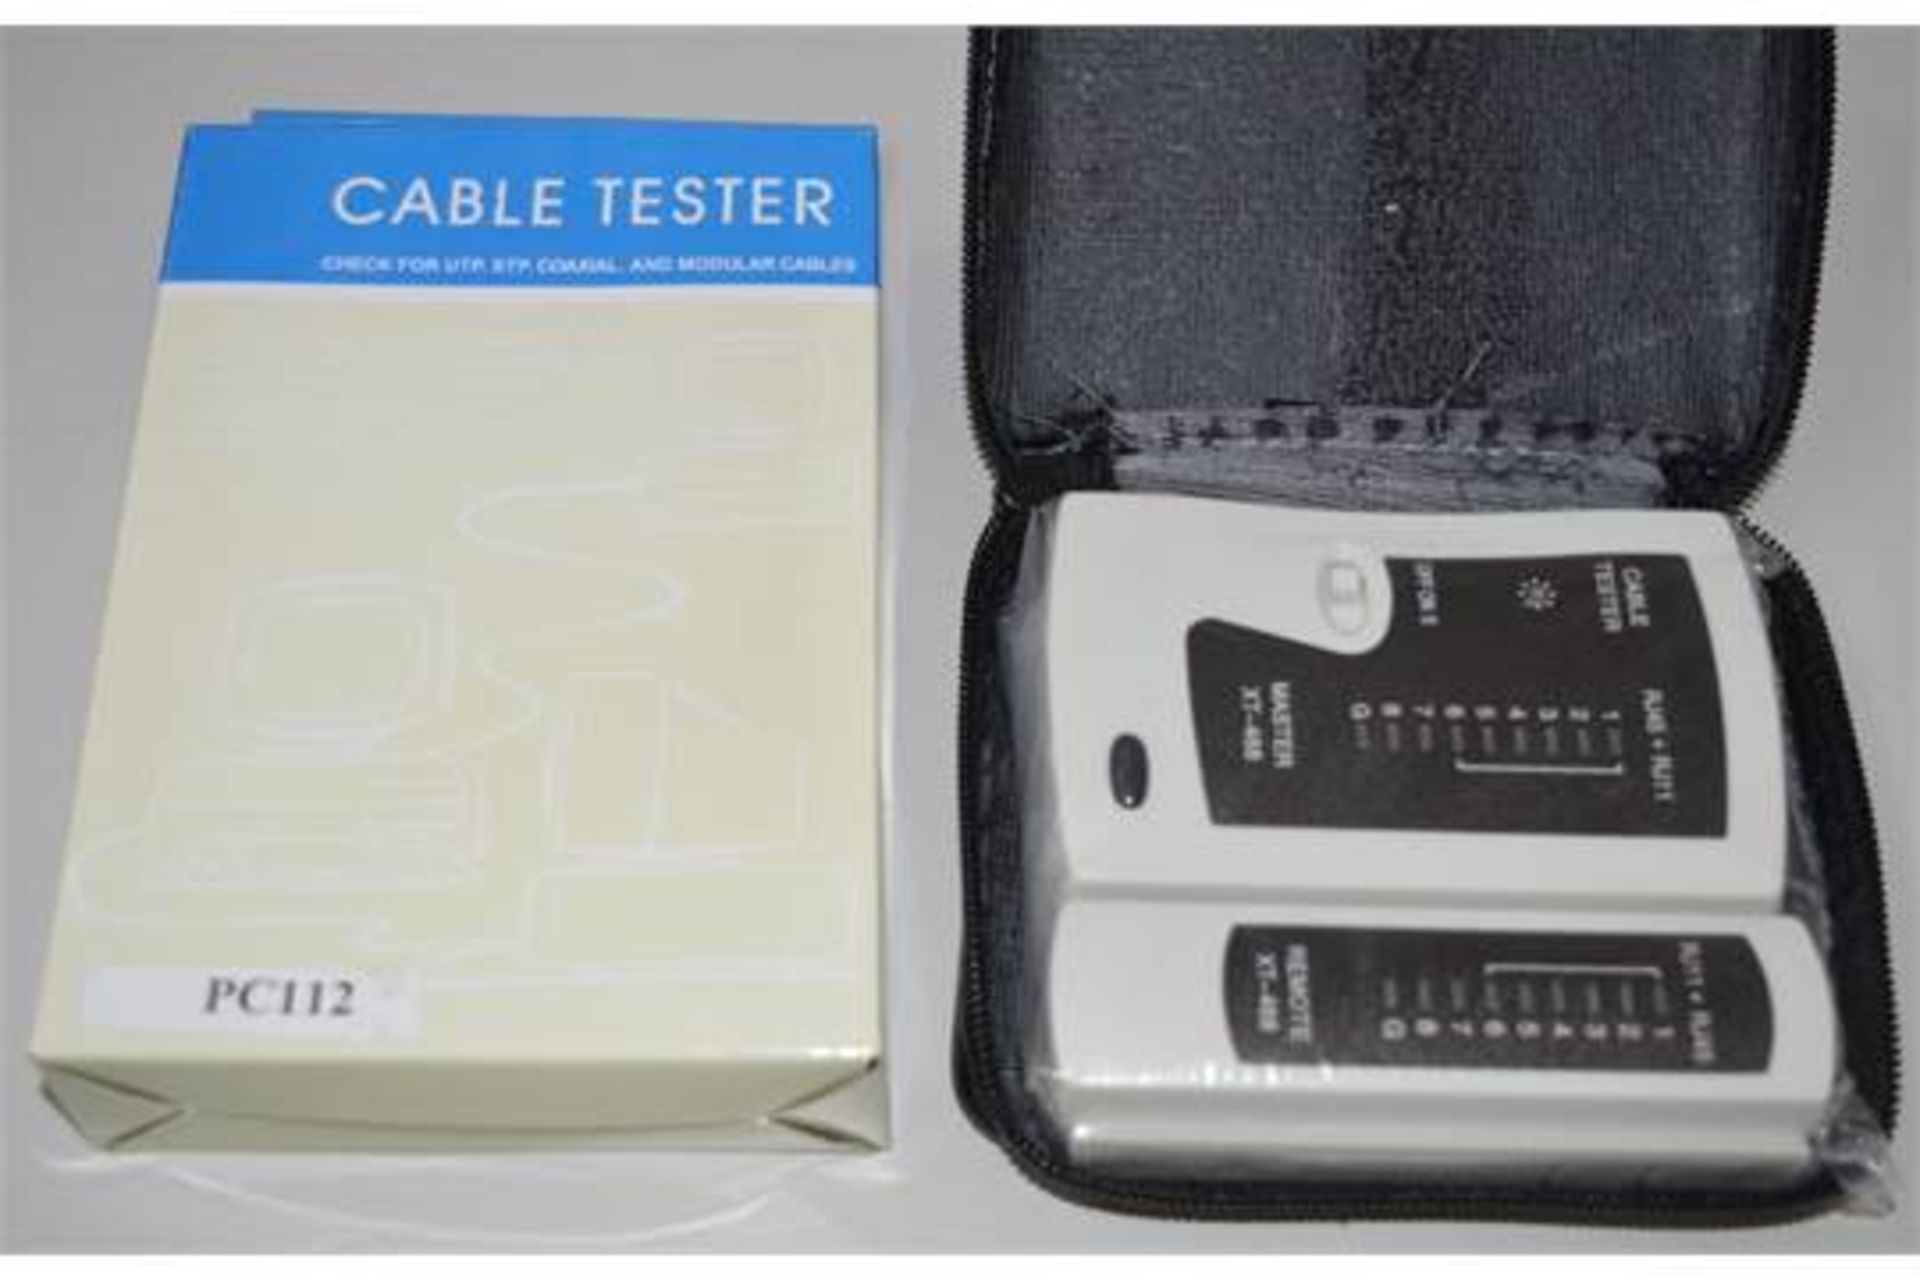 1 x Knightsbridge Structured Wiring Cable Tester - Check For UTP, STP, Coaxial and Modular